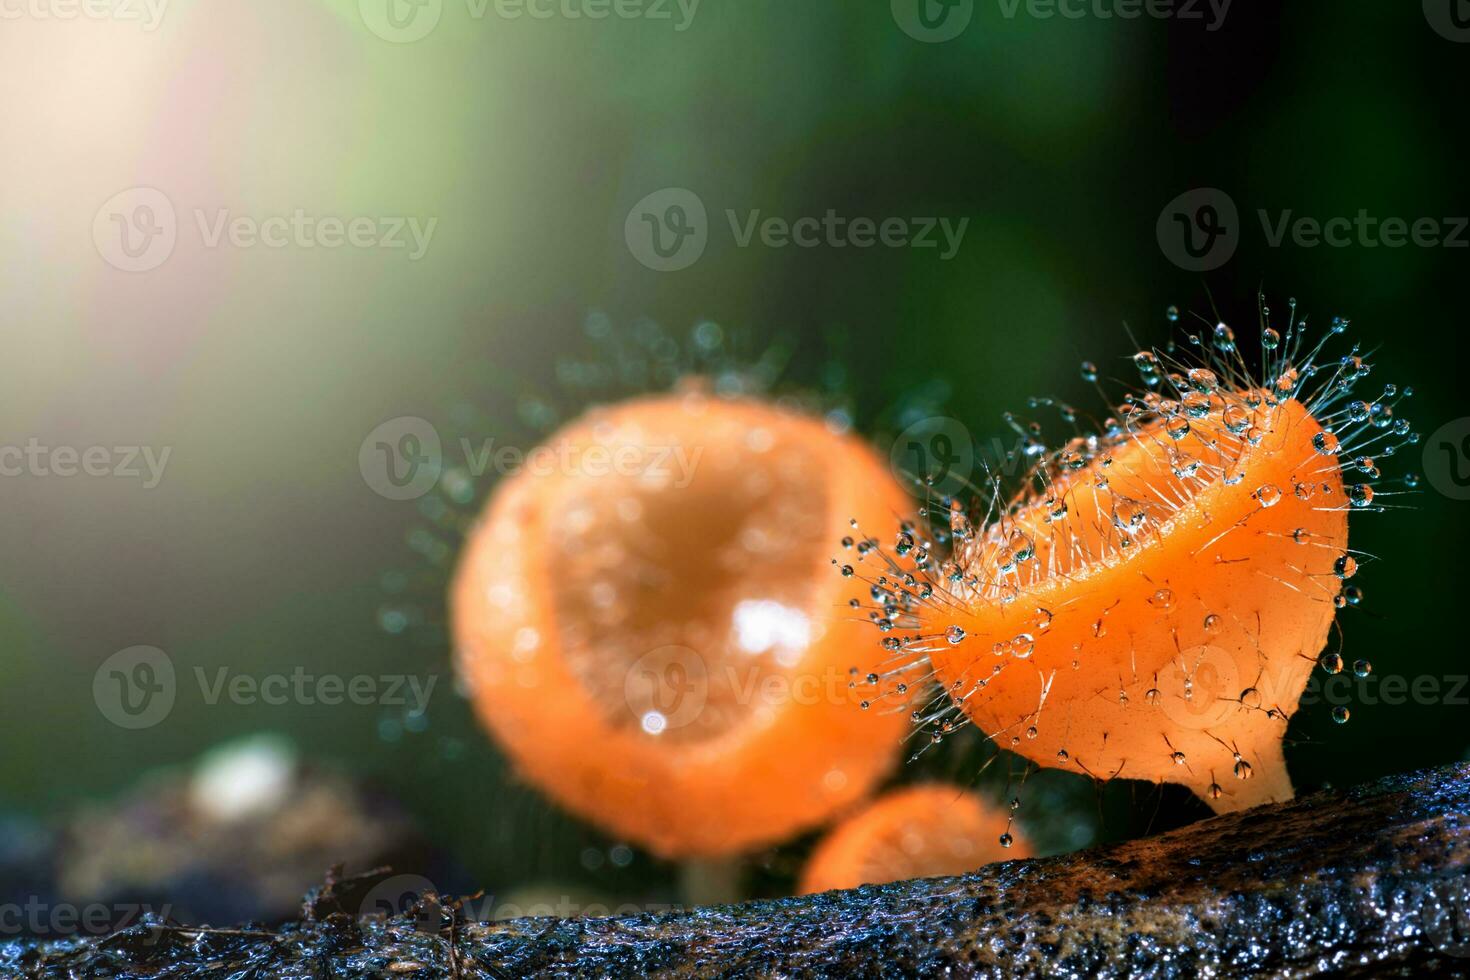 Cookeina tricholoma or Phylum Ascomycota with droplet on a dead wood in the rain forest photo